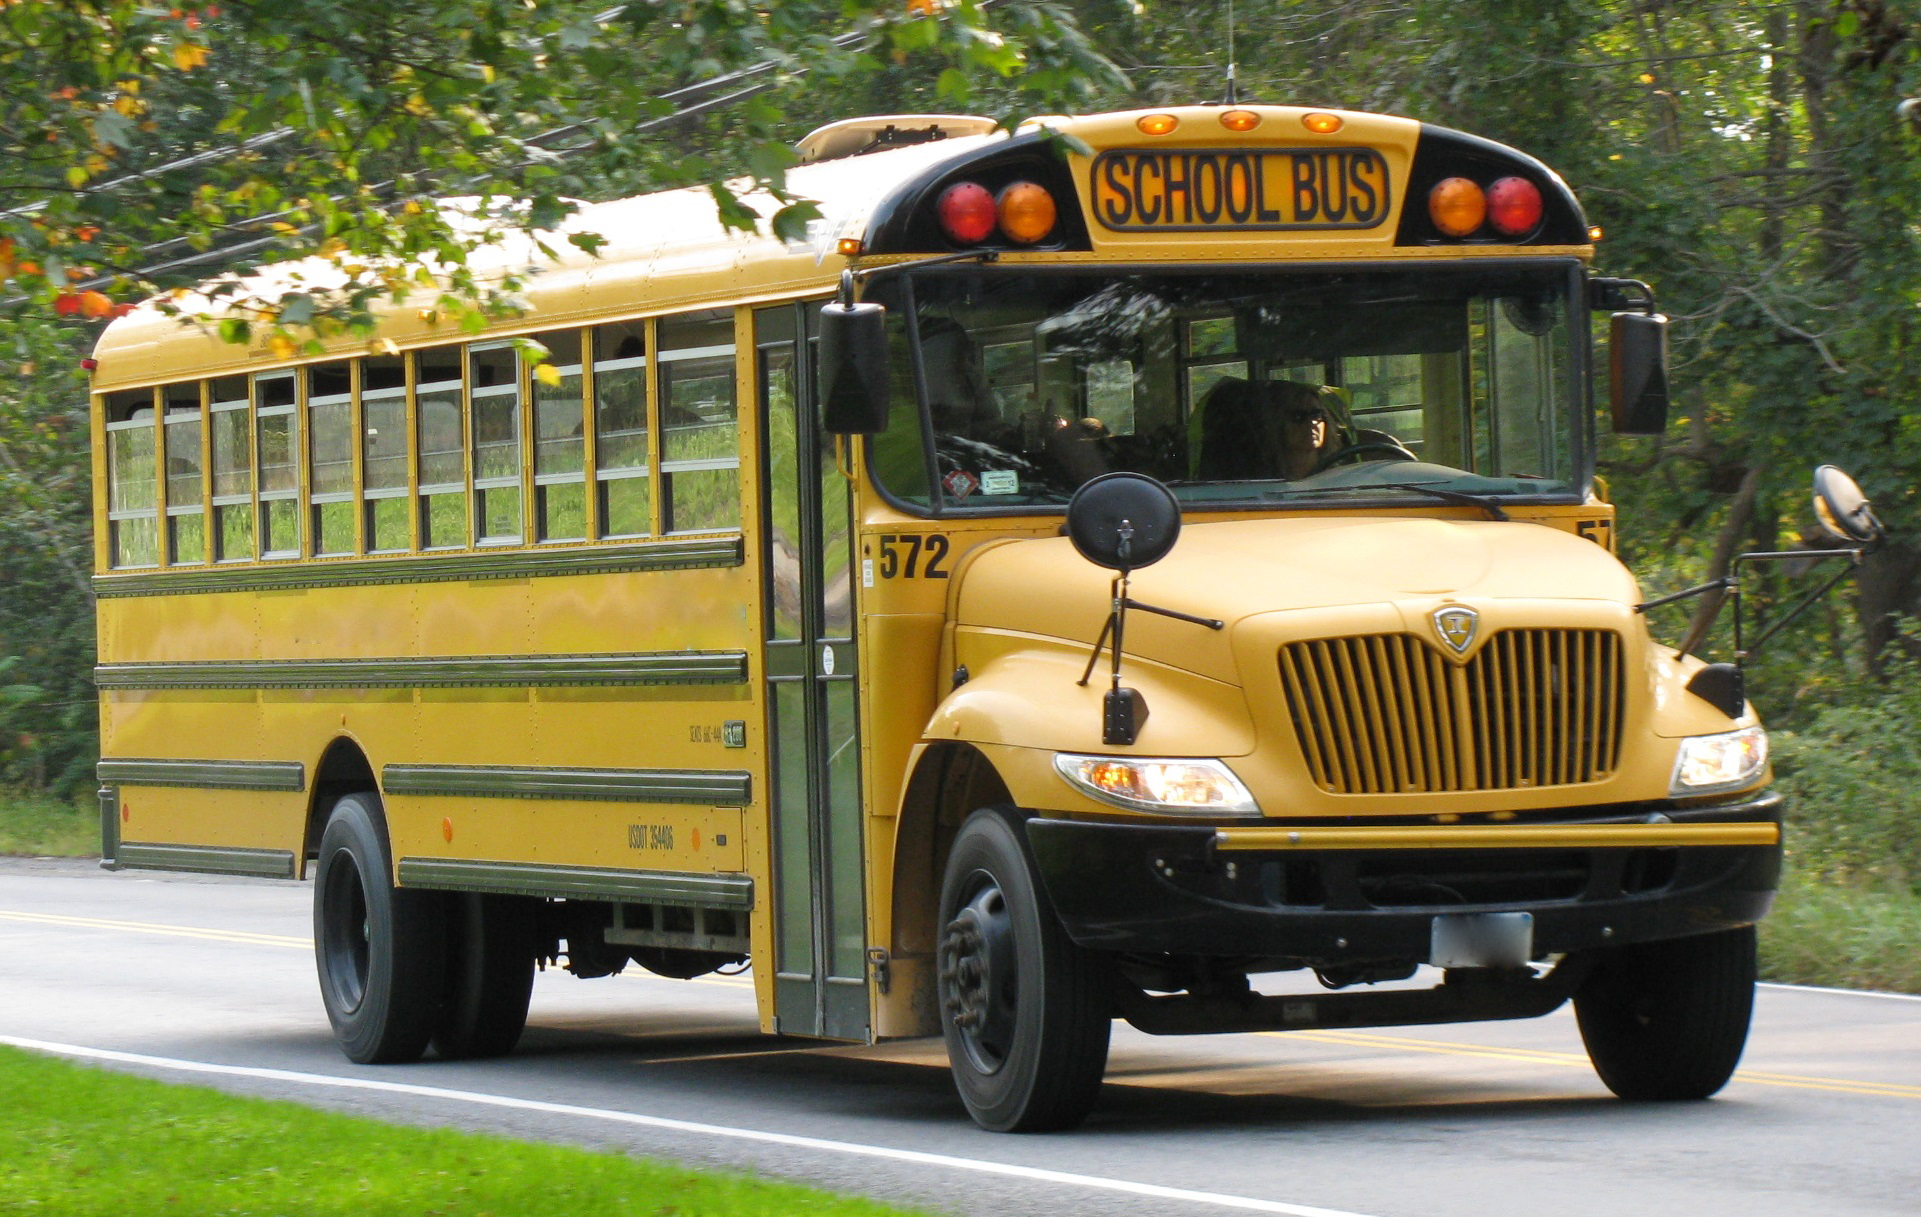 WYTHE COUNTY BOARD OF SUPERVISORS ENCOURAGE MOTORISTS TO BE MINDFUL OF CHILDREN AT BUS STOPS